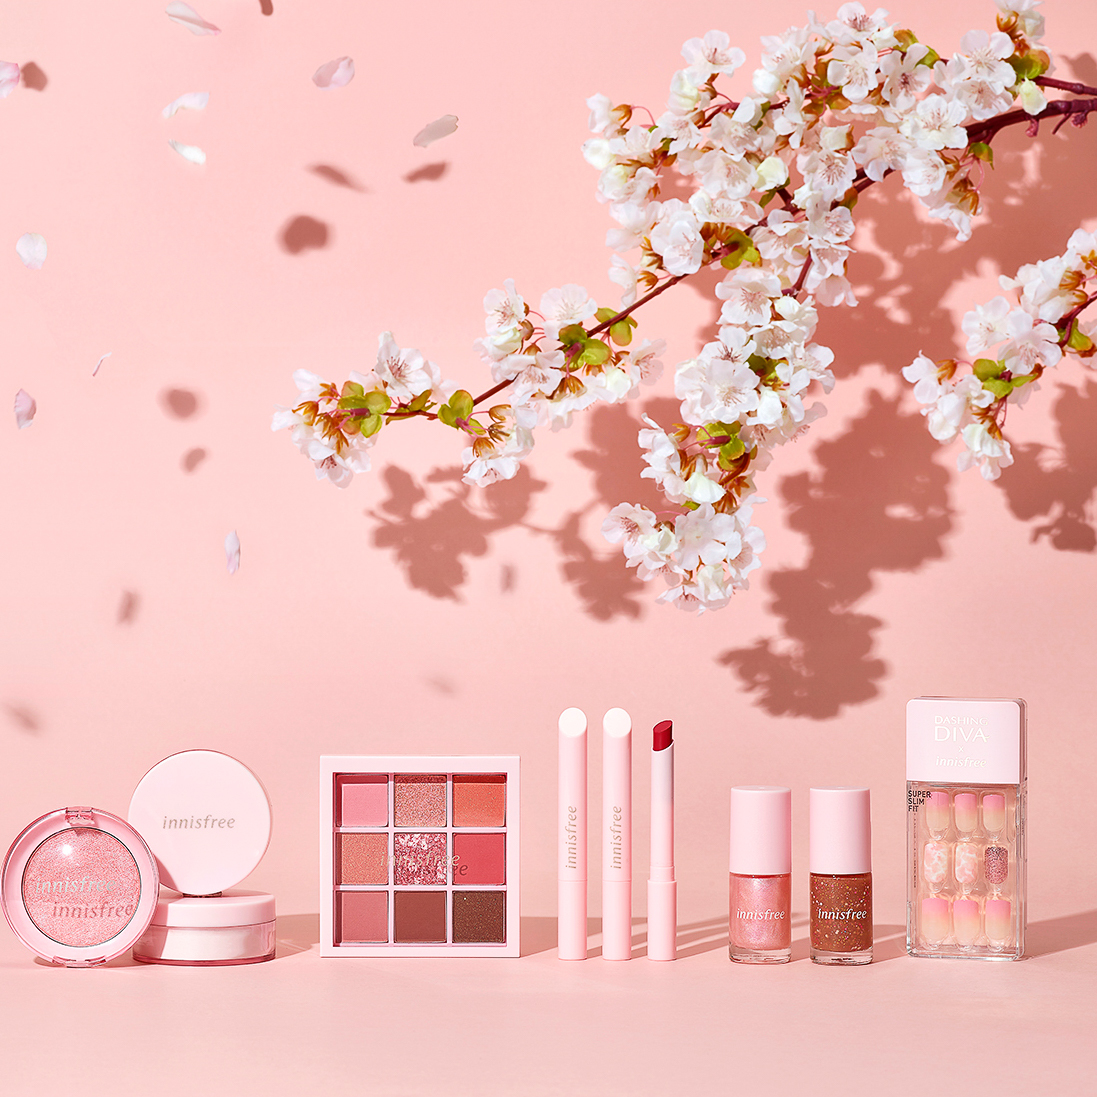 Innisfree Adds New Makeup and Skincare Products to Its Jeju Cherry Blossom Collection